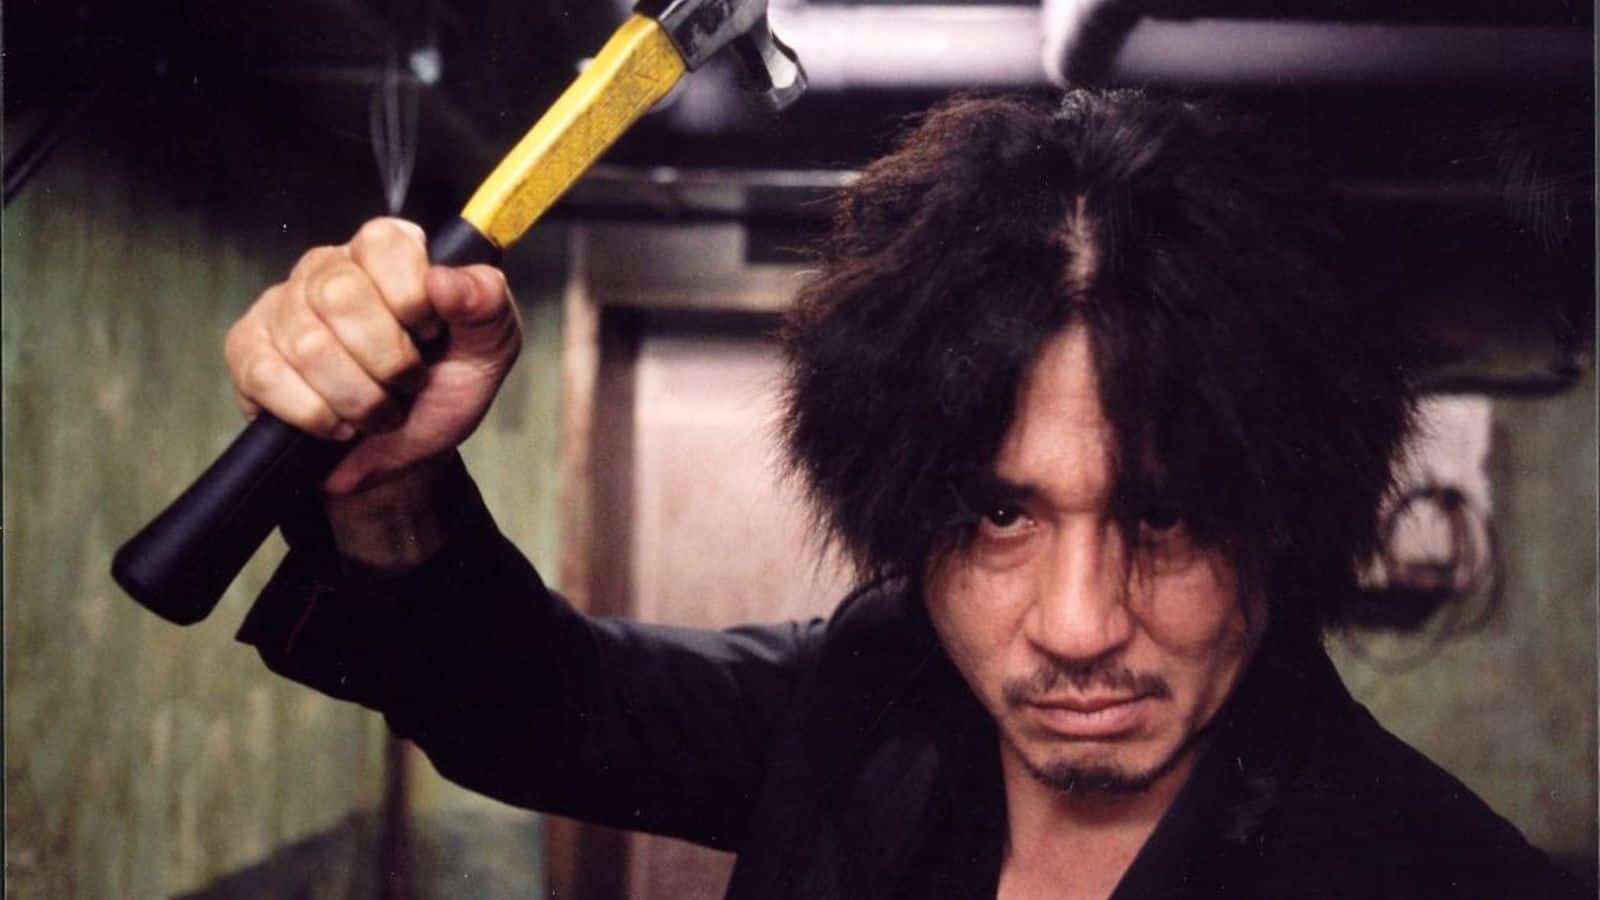 Chinese streaming giant iQIYI faces legal action over 'Oldboy'